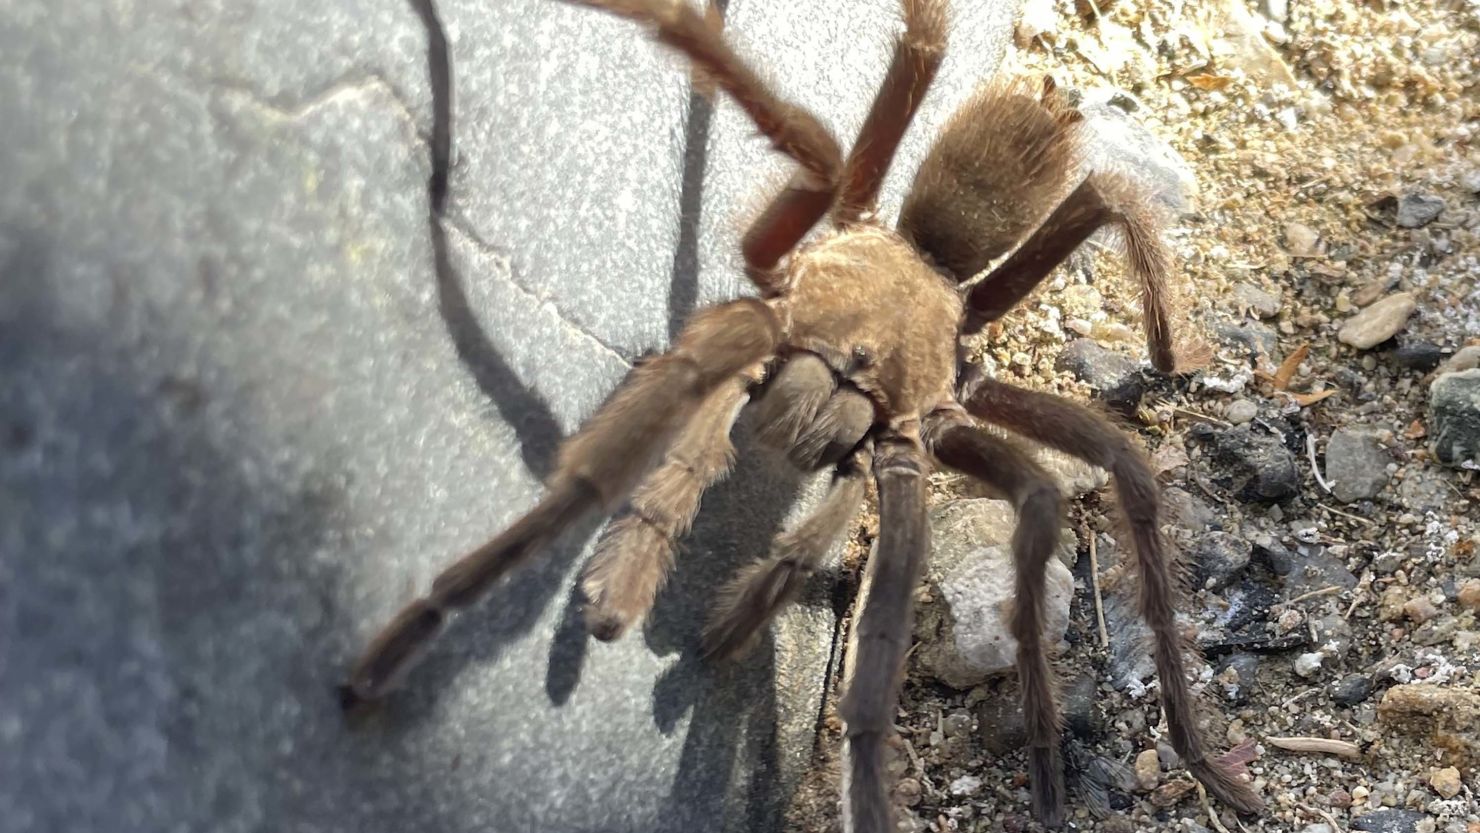 A tarantula’s bite is reported to be similar to a bee sting and is not deadly to humans, say Death Valley National Park officials.